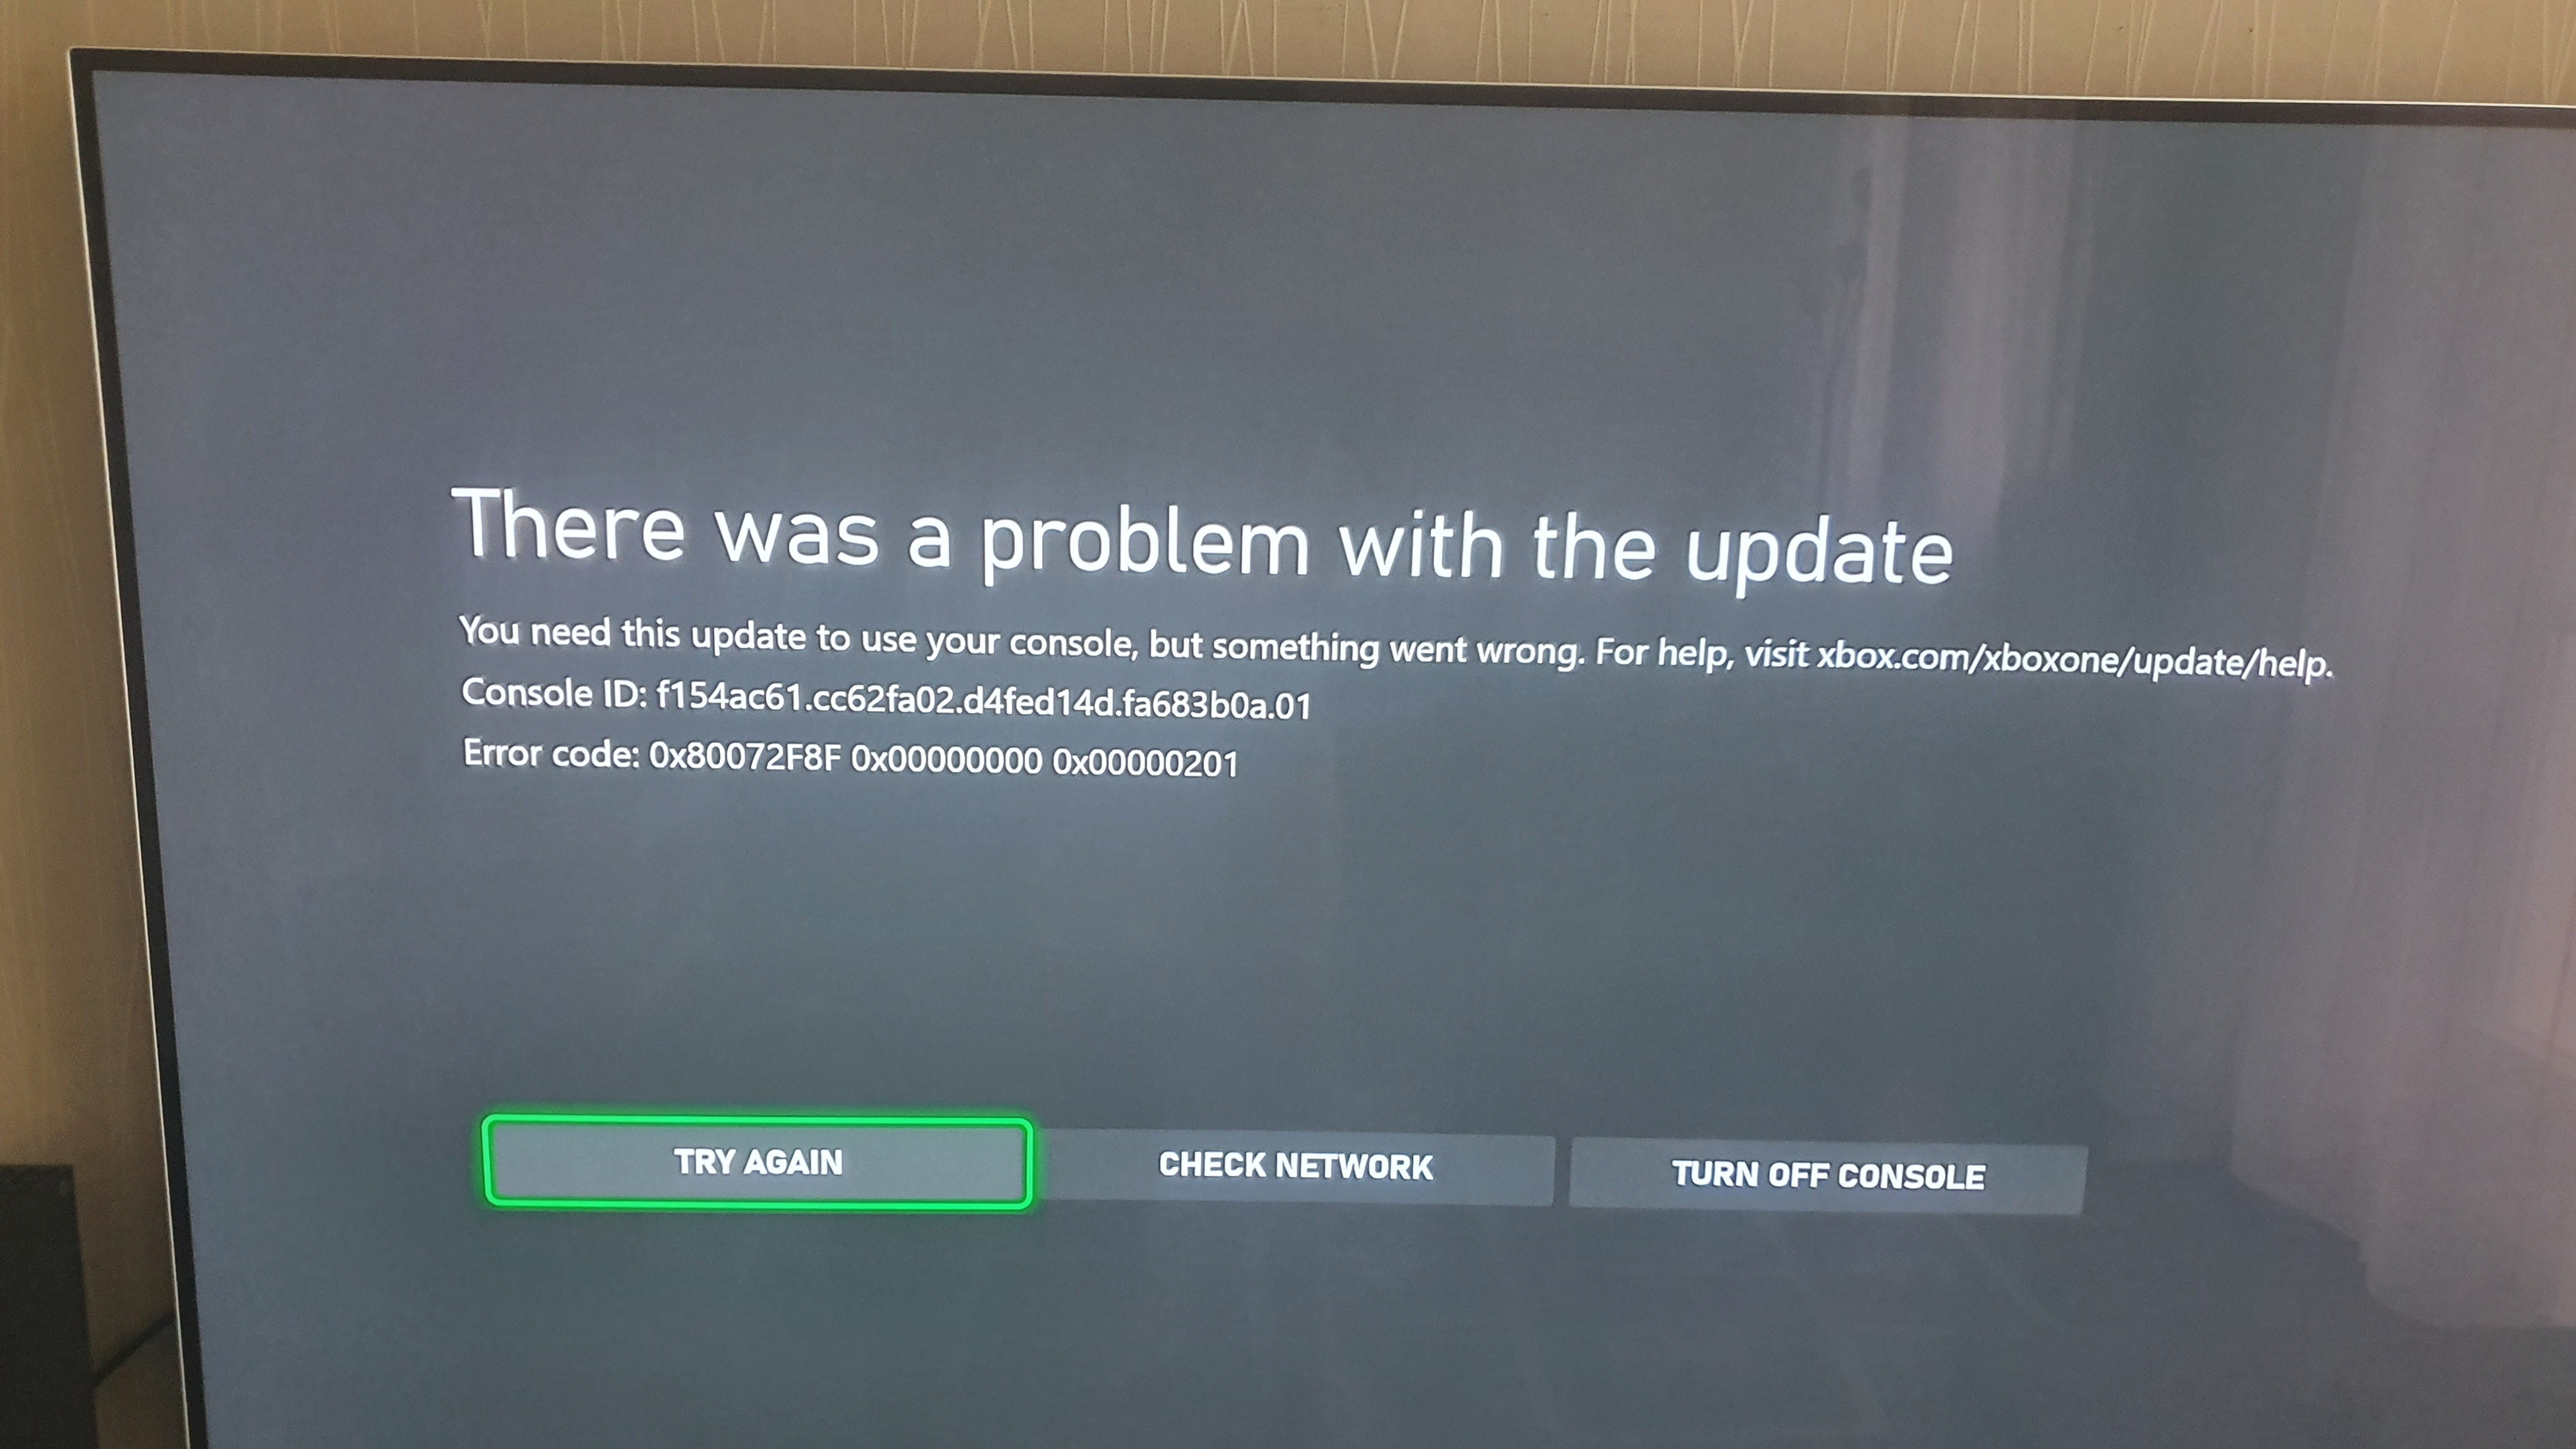 Zoologisk have læber centeret Unable to use XBox Series X - Microsoft Community